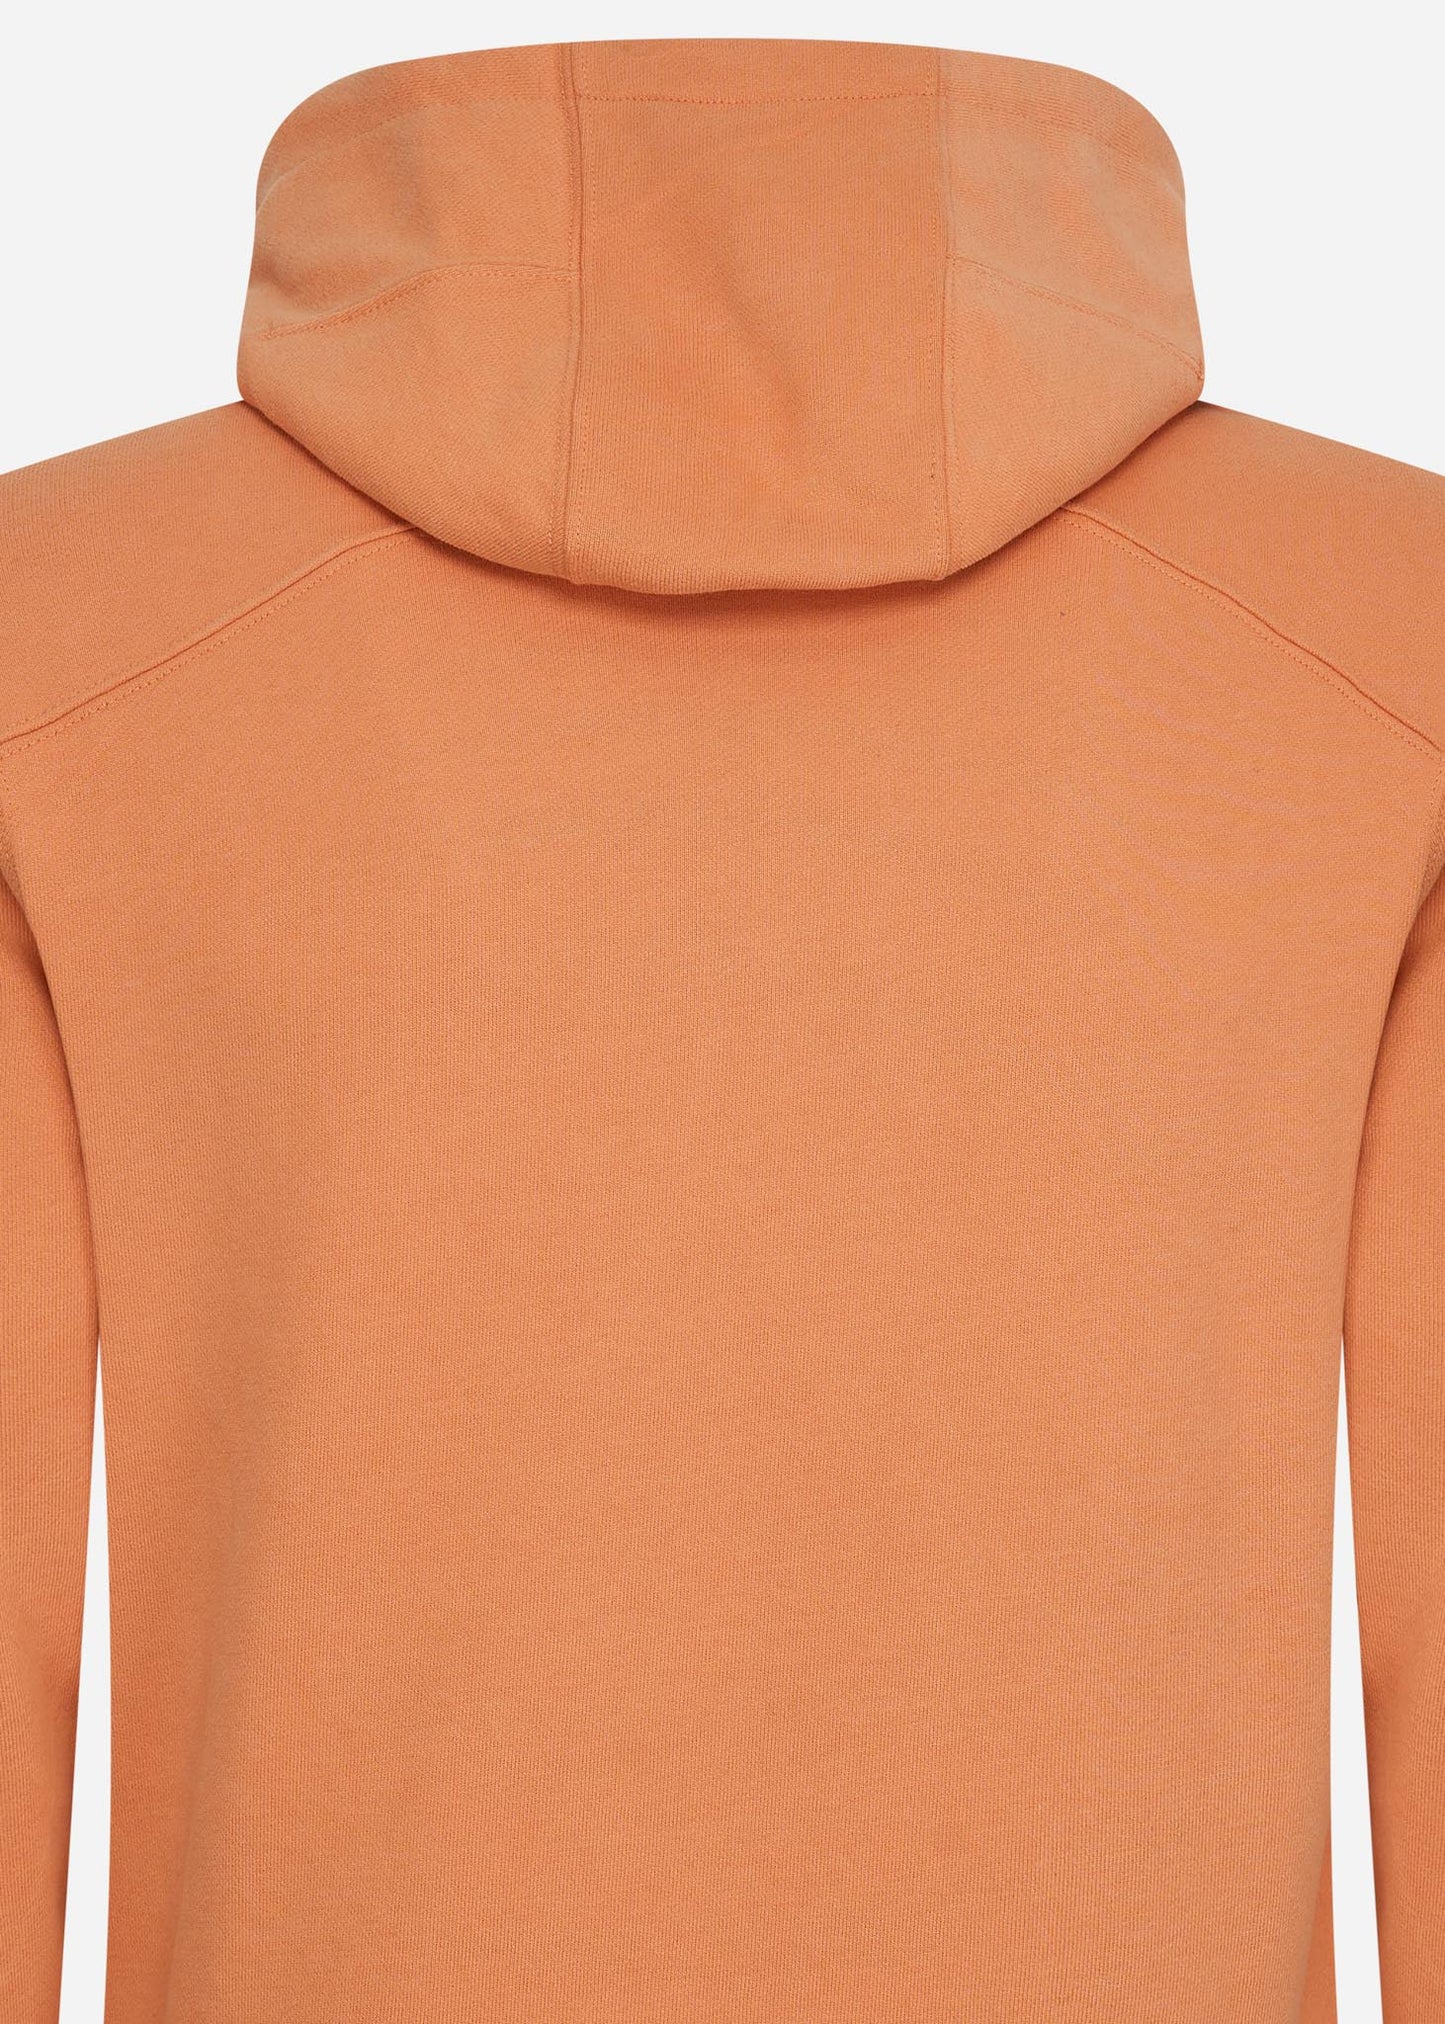 Core overhead hoody - coral gold